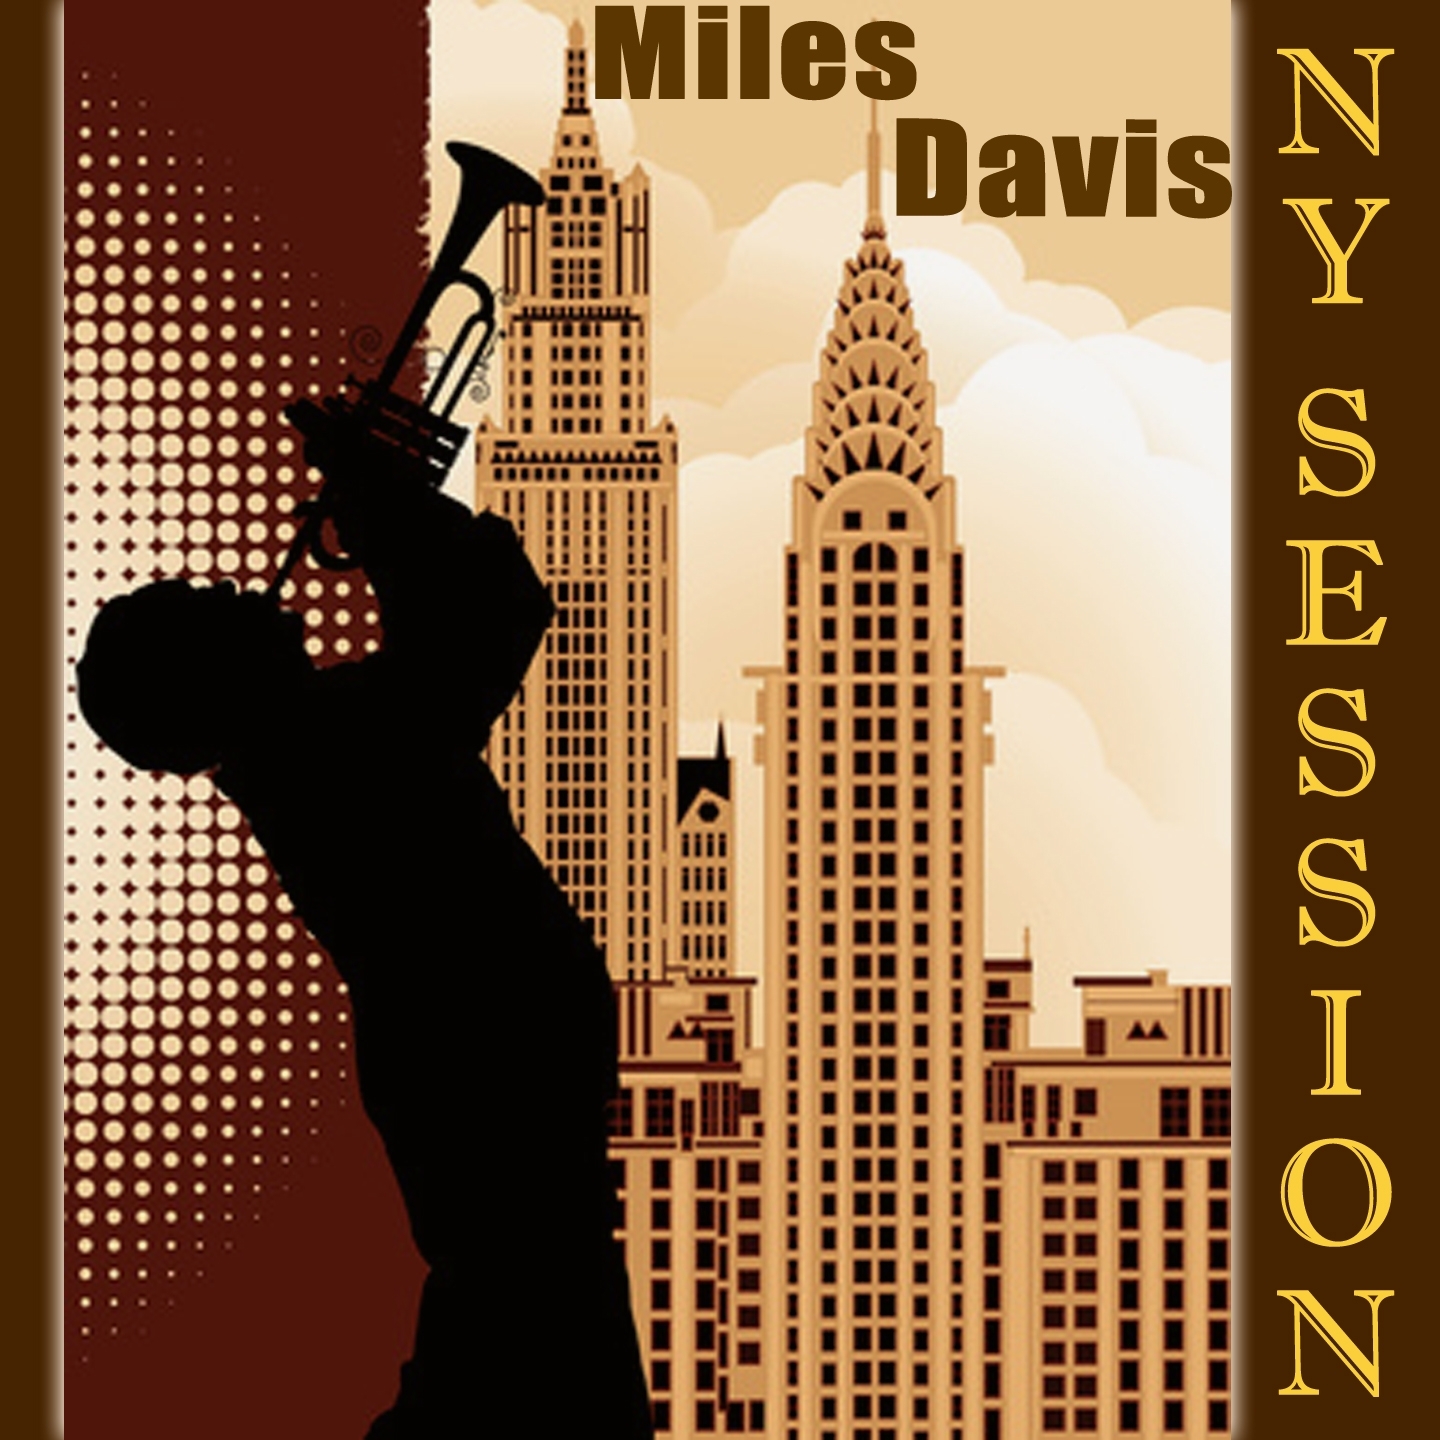 The New York Session (The Most Important Miles Davis Recording Sessions in Ny)